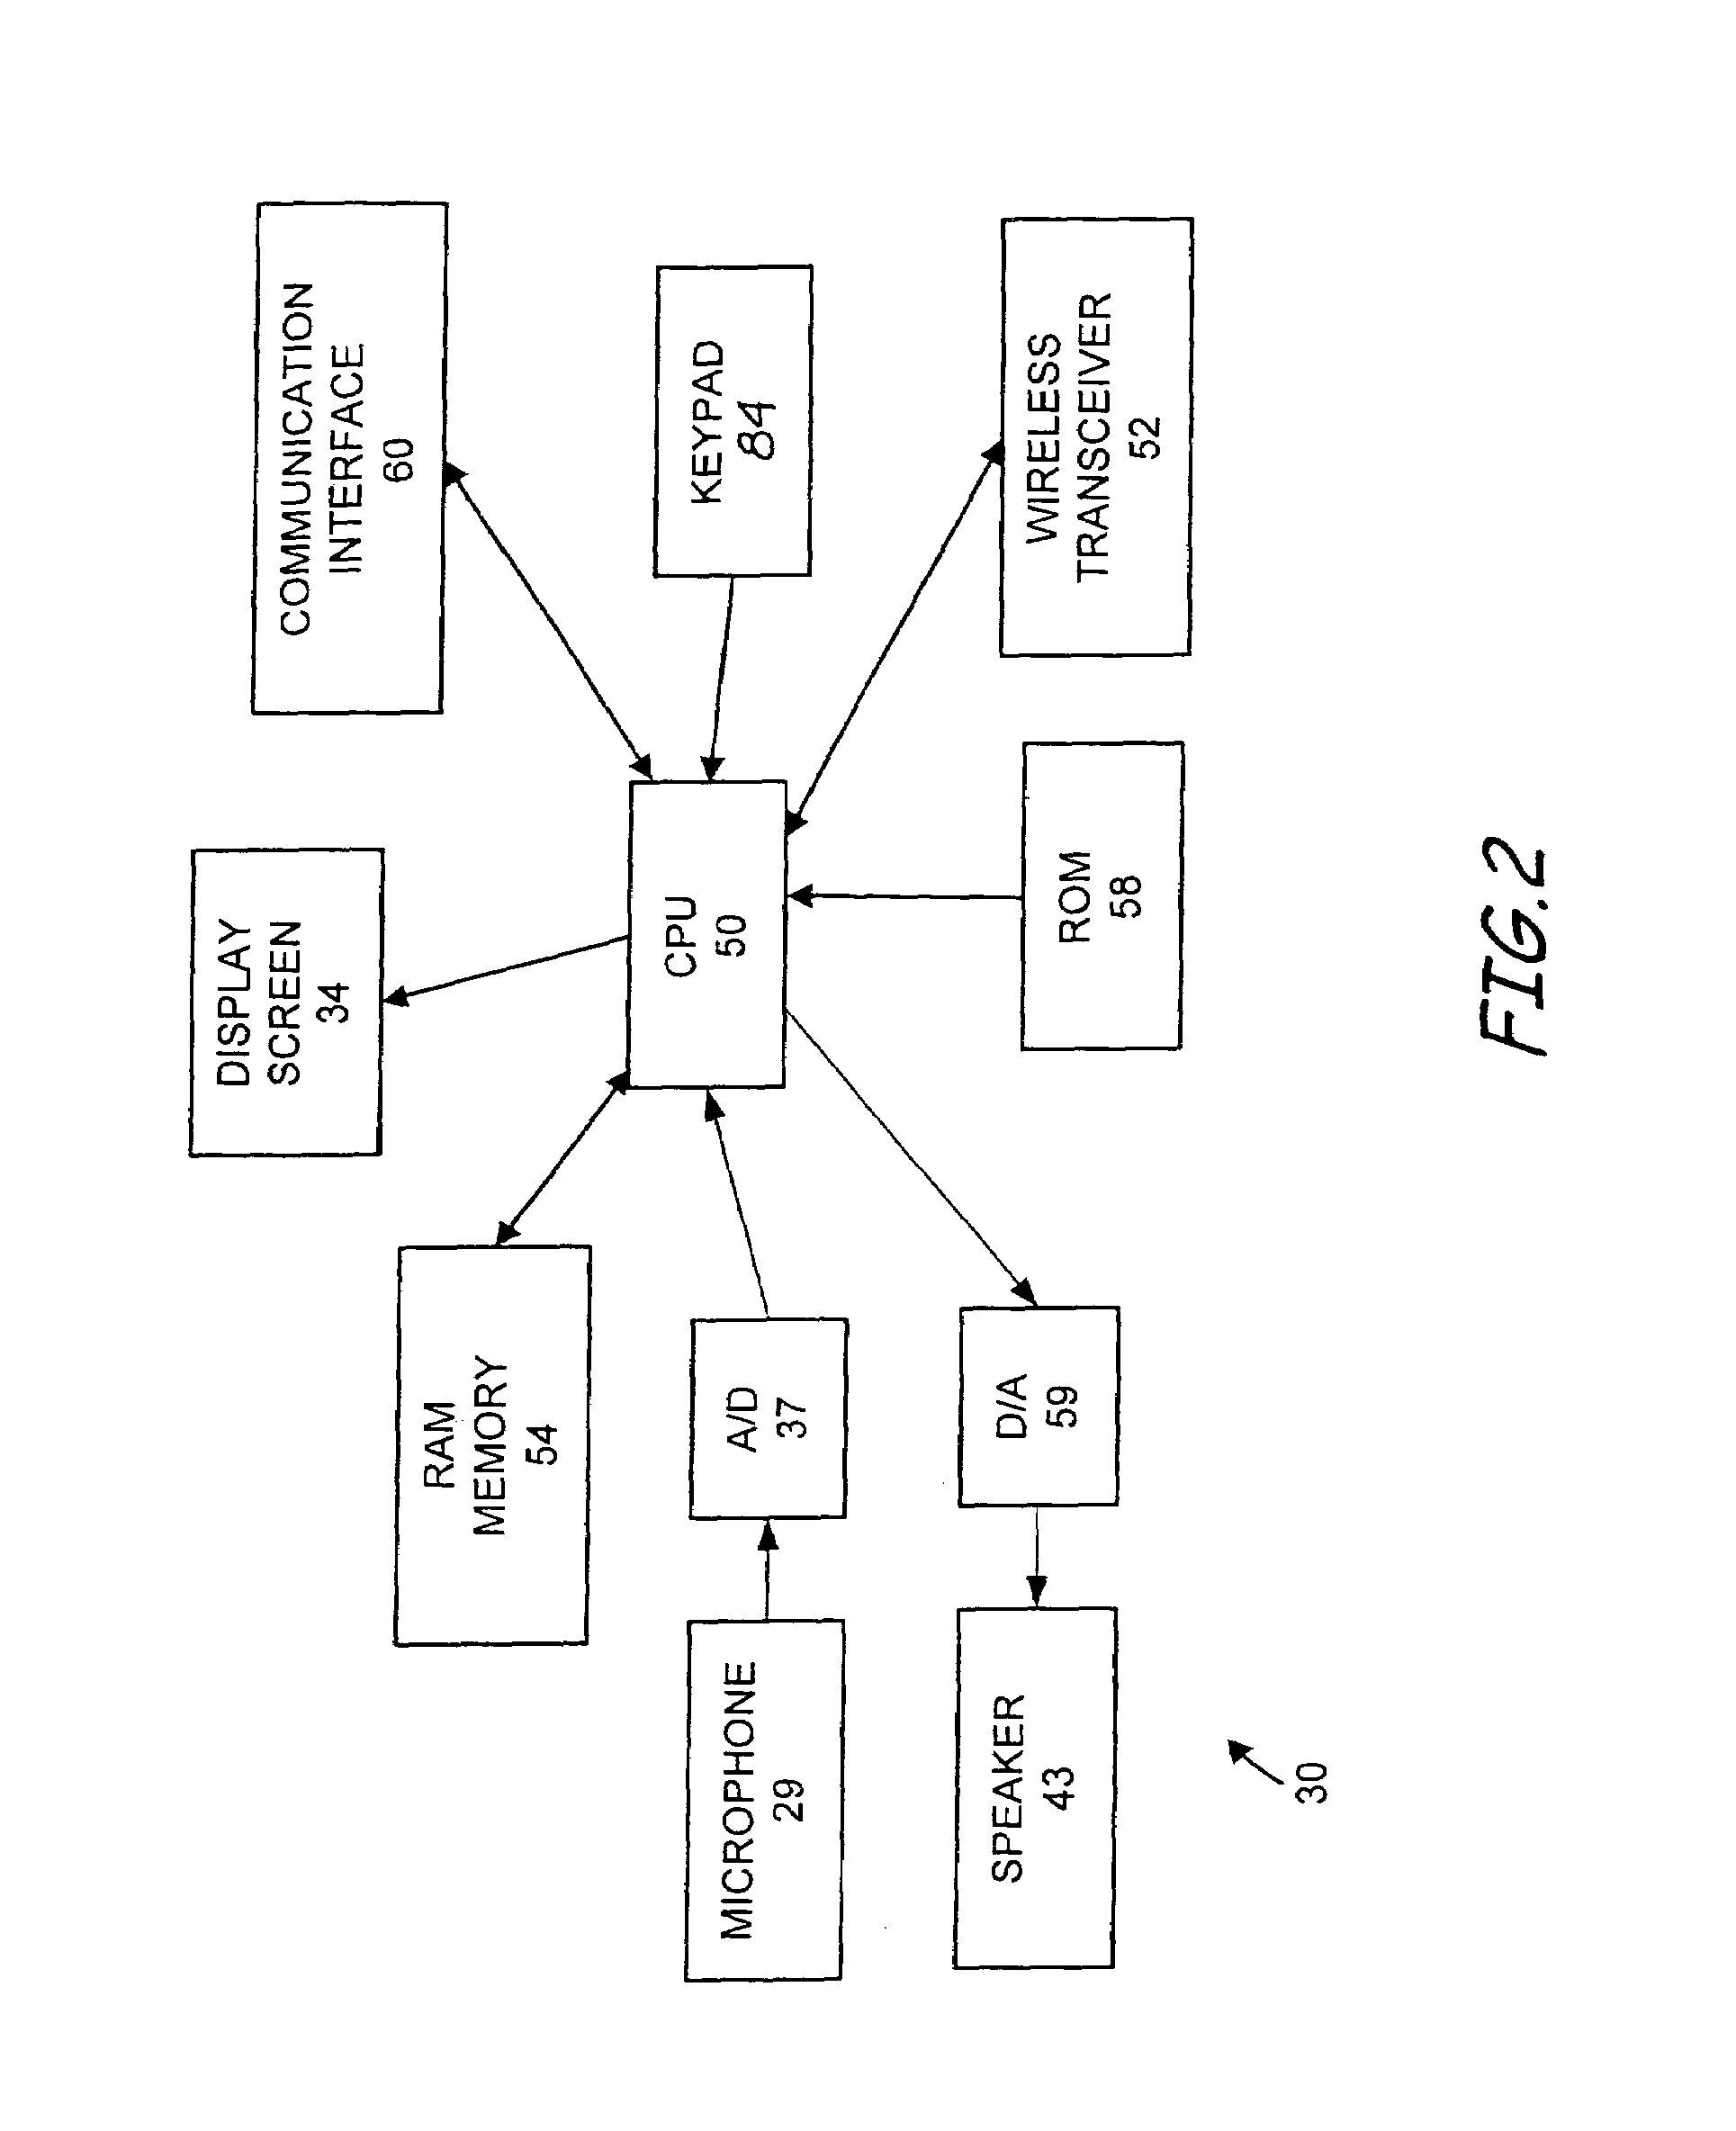 Servers for web enabled speech recognition